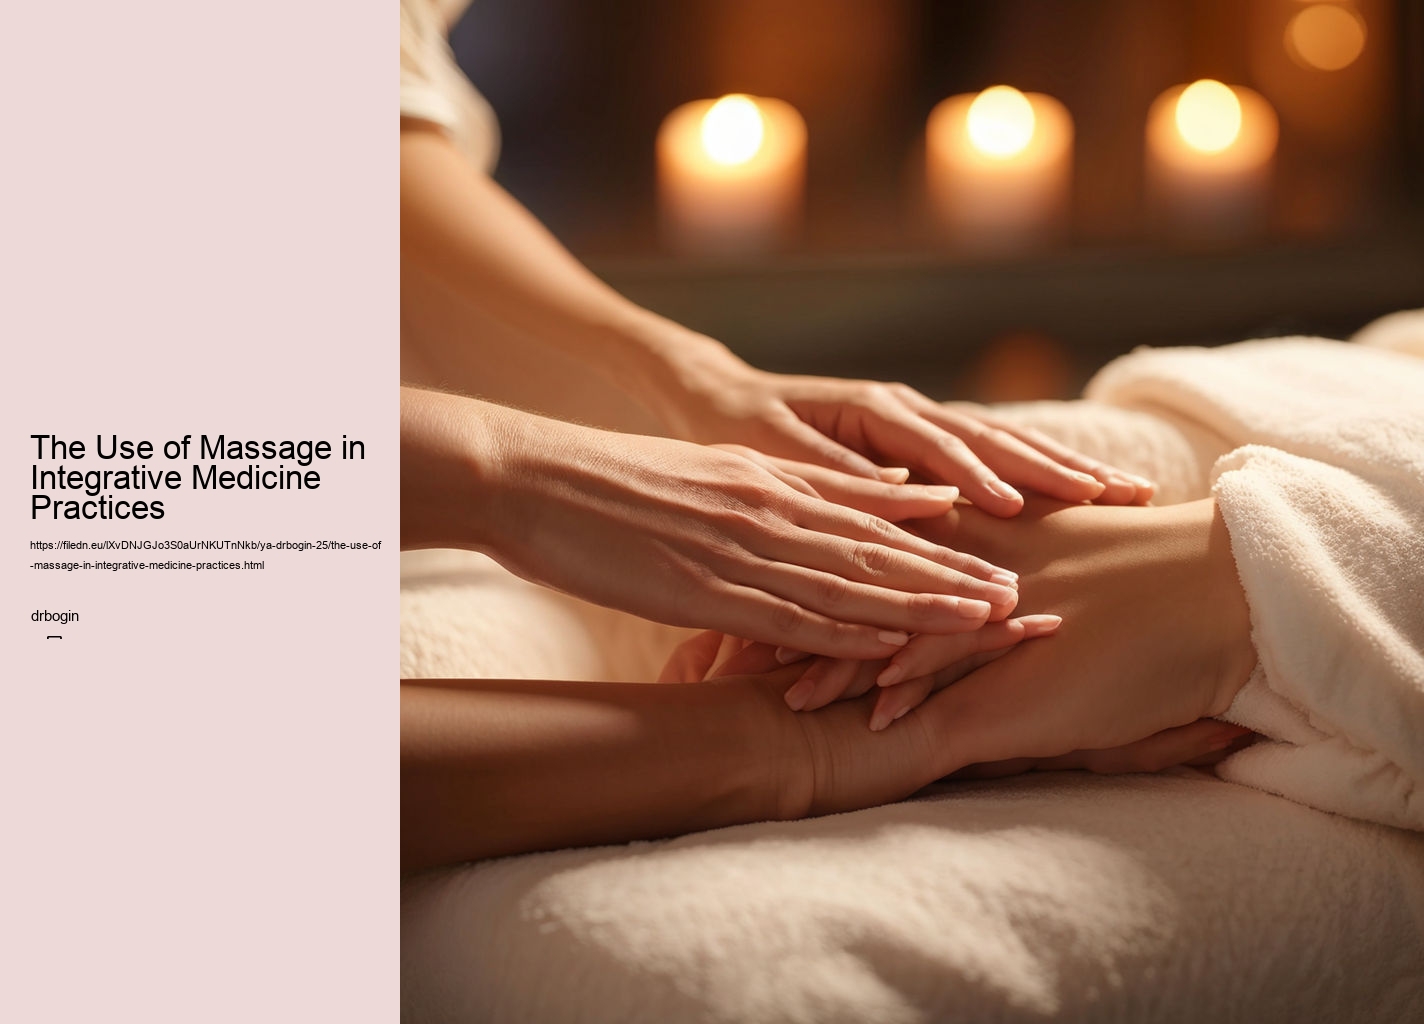 The Use of Massage in Integrative Medicine Practices